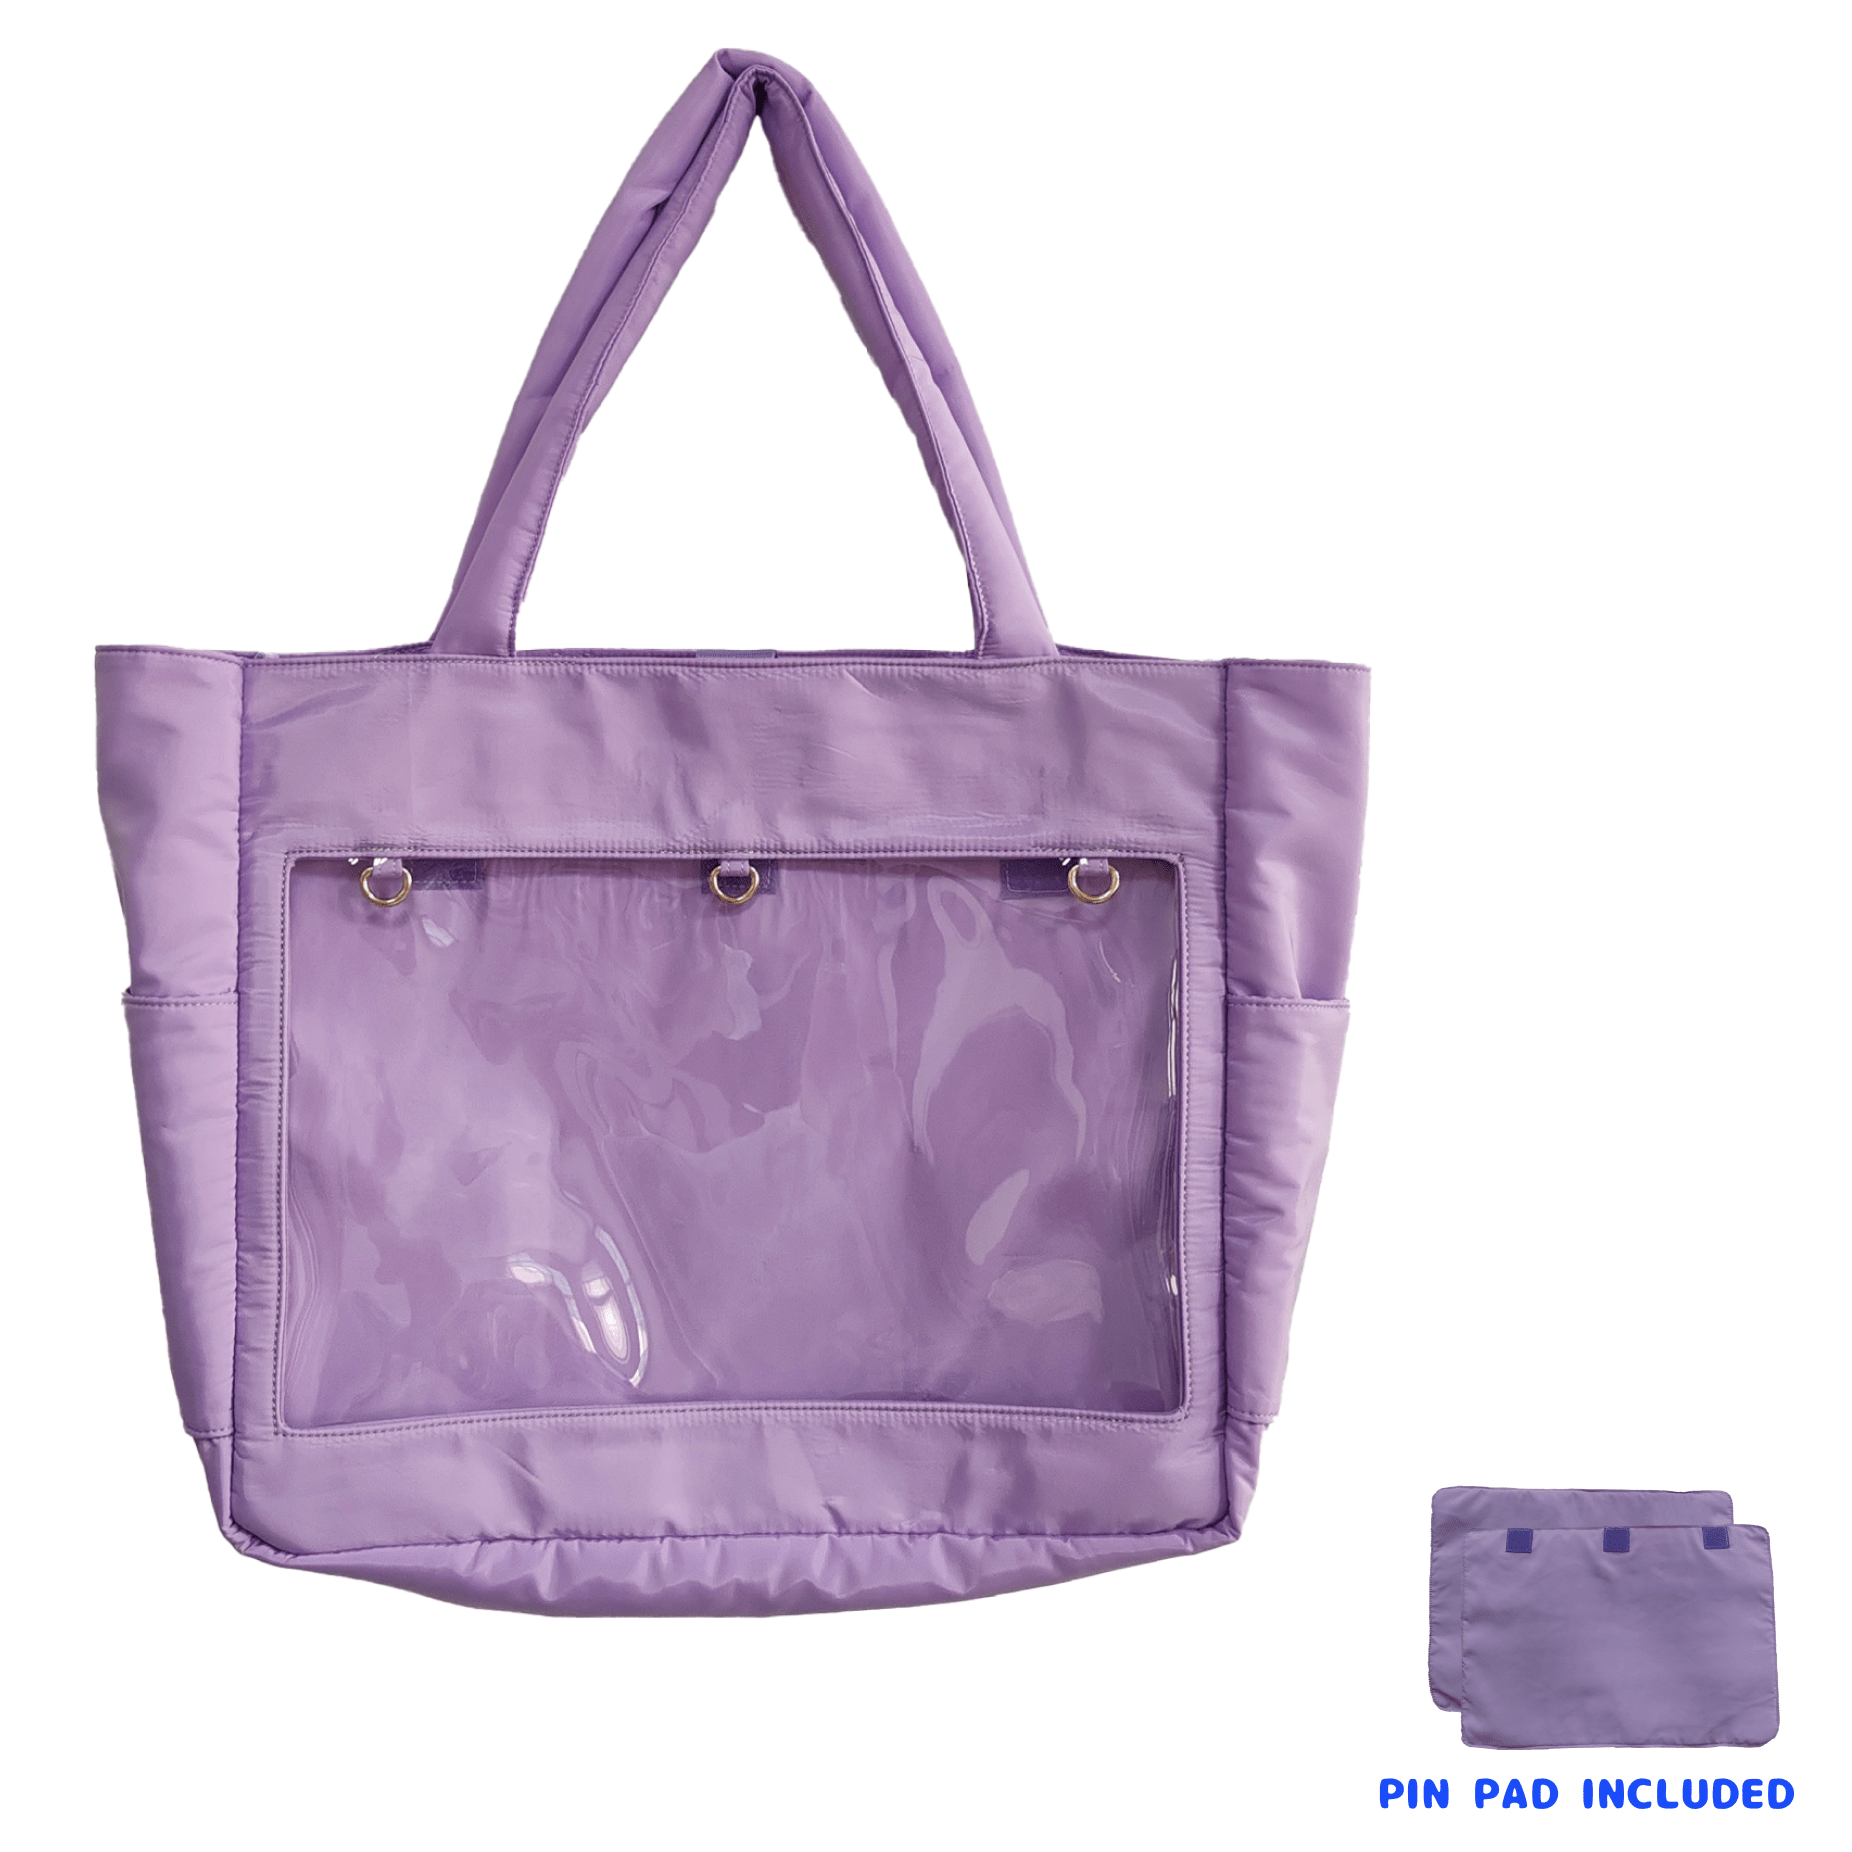 pinbuds Bags Purple Polyester ( ft puffy handle) Pin ITA Tote Bag v2 (black cotton)